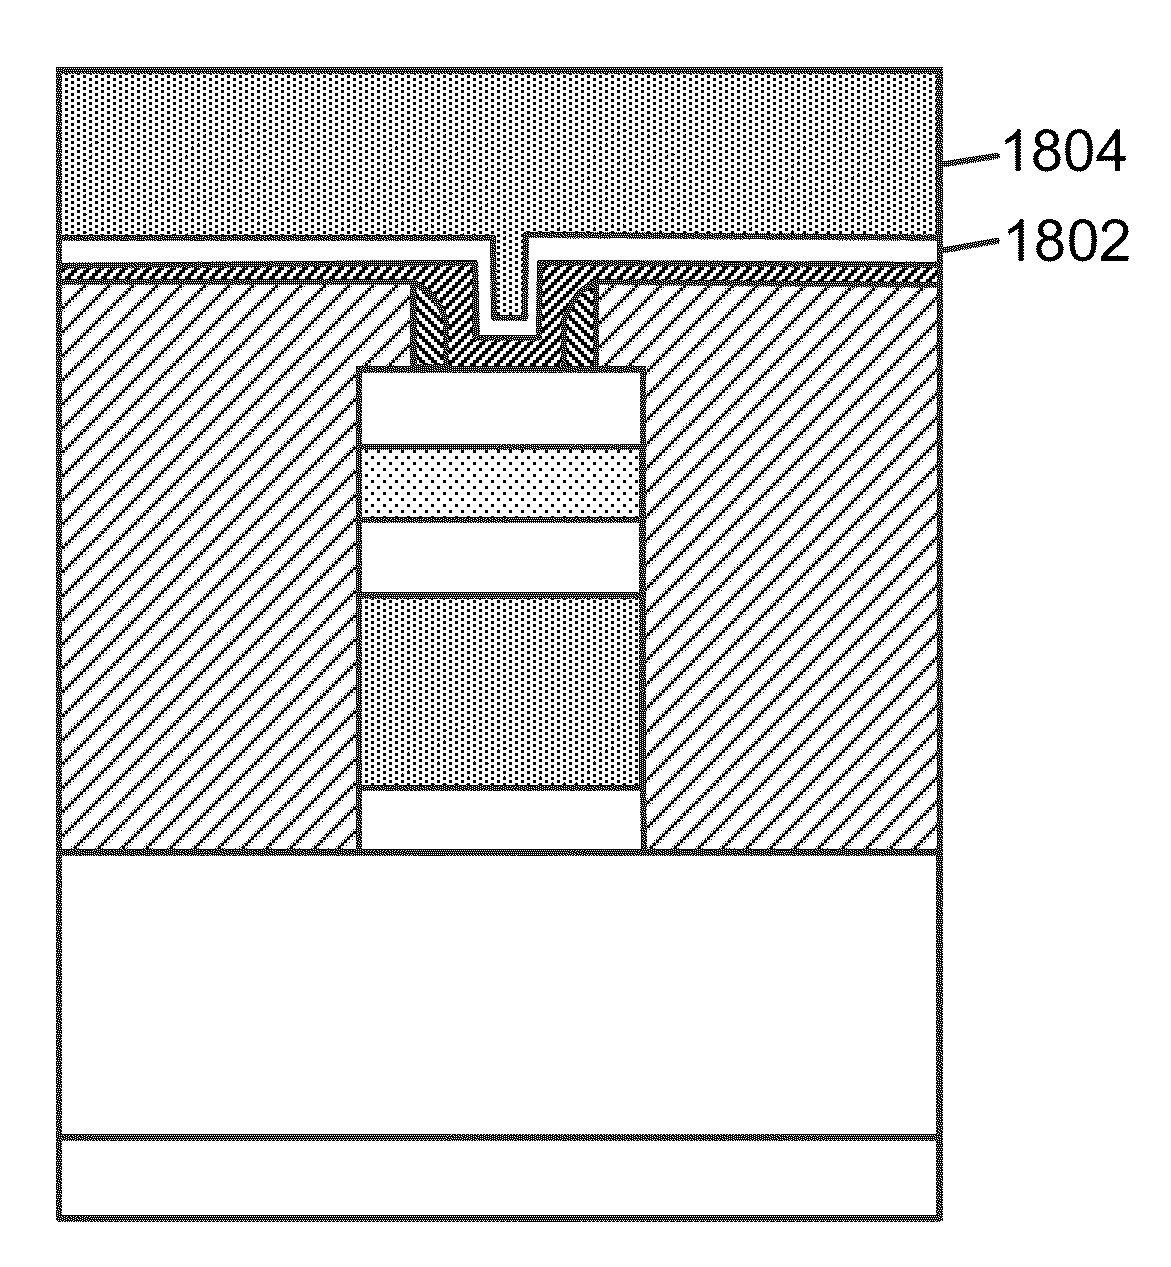 Improved on/off ratio for non-volatile memory device and method